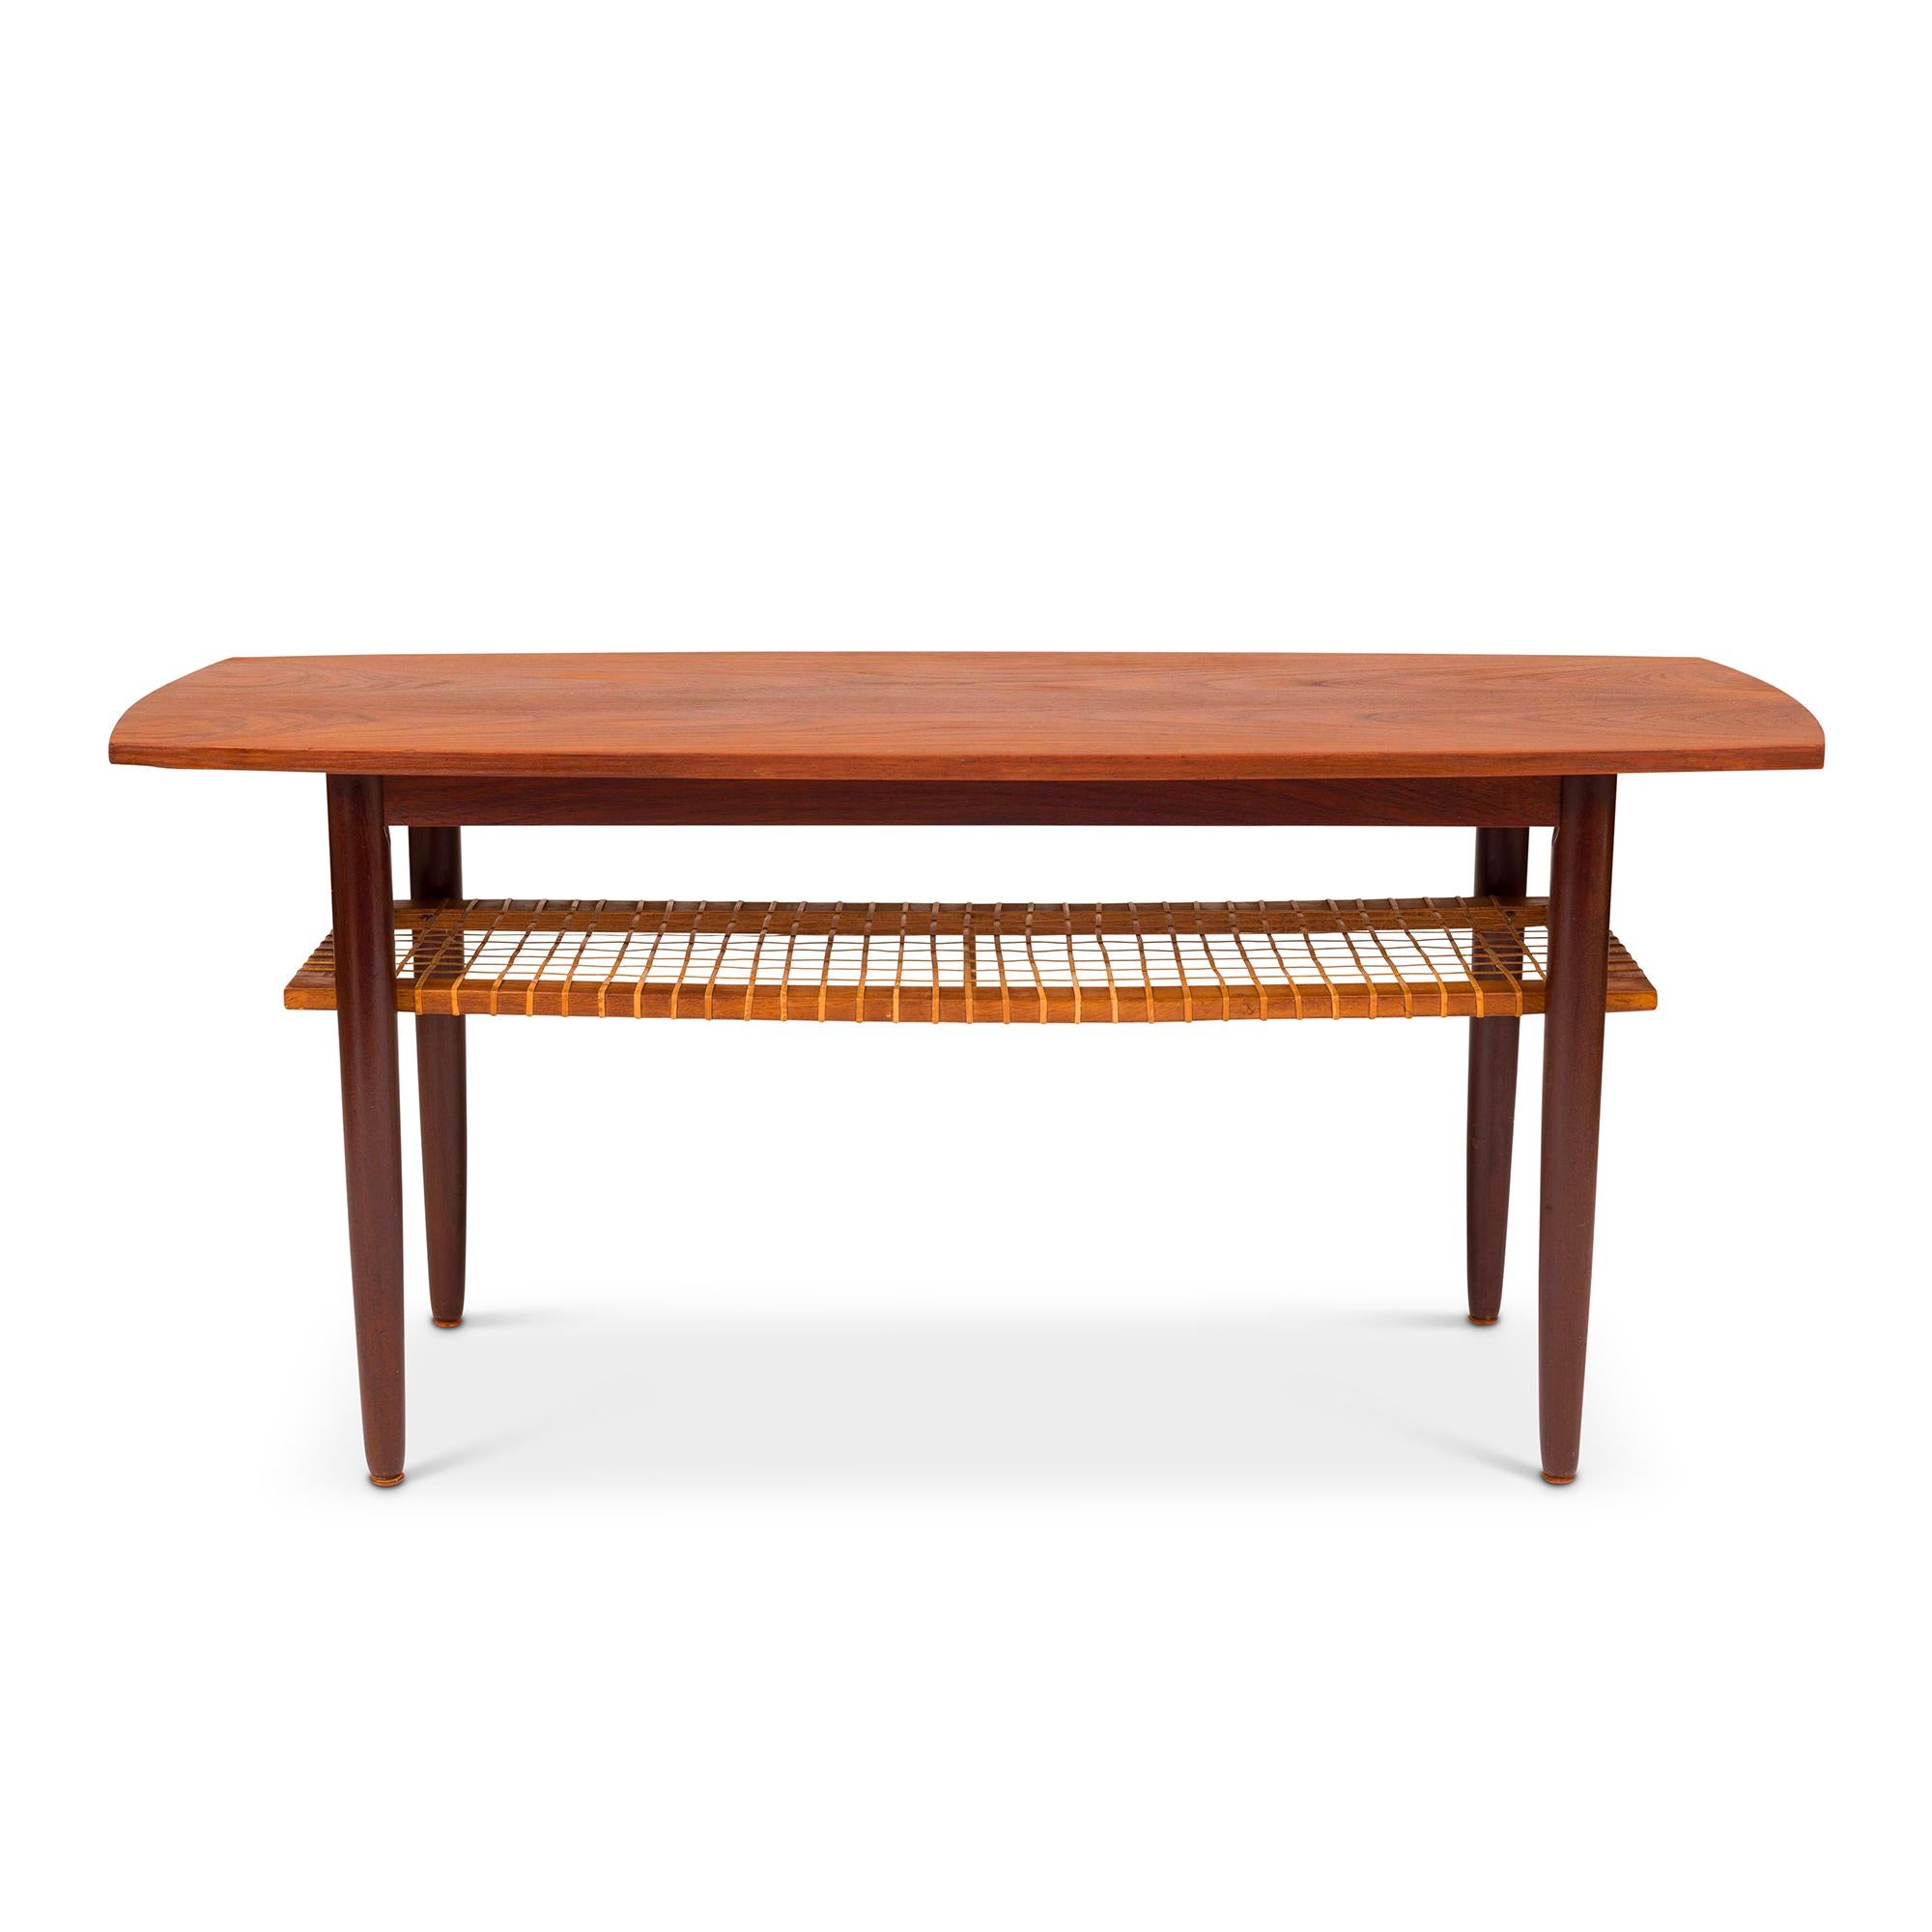 The teak and cane Danish coffee table is a stylish and versatile piece of furniture emblematic of mid-century modern design. Characterized by its clean lines, elegant simplicity, and expert craftsmanship, this coffee table typically features a